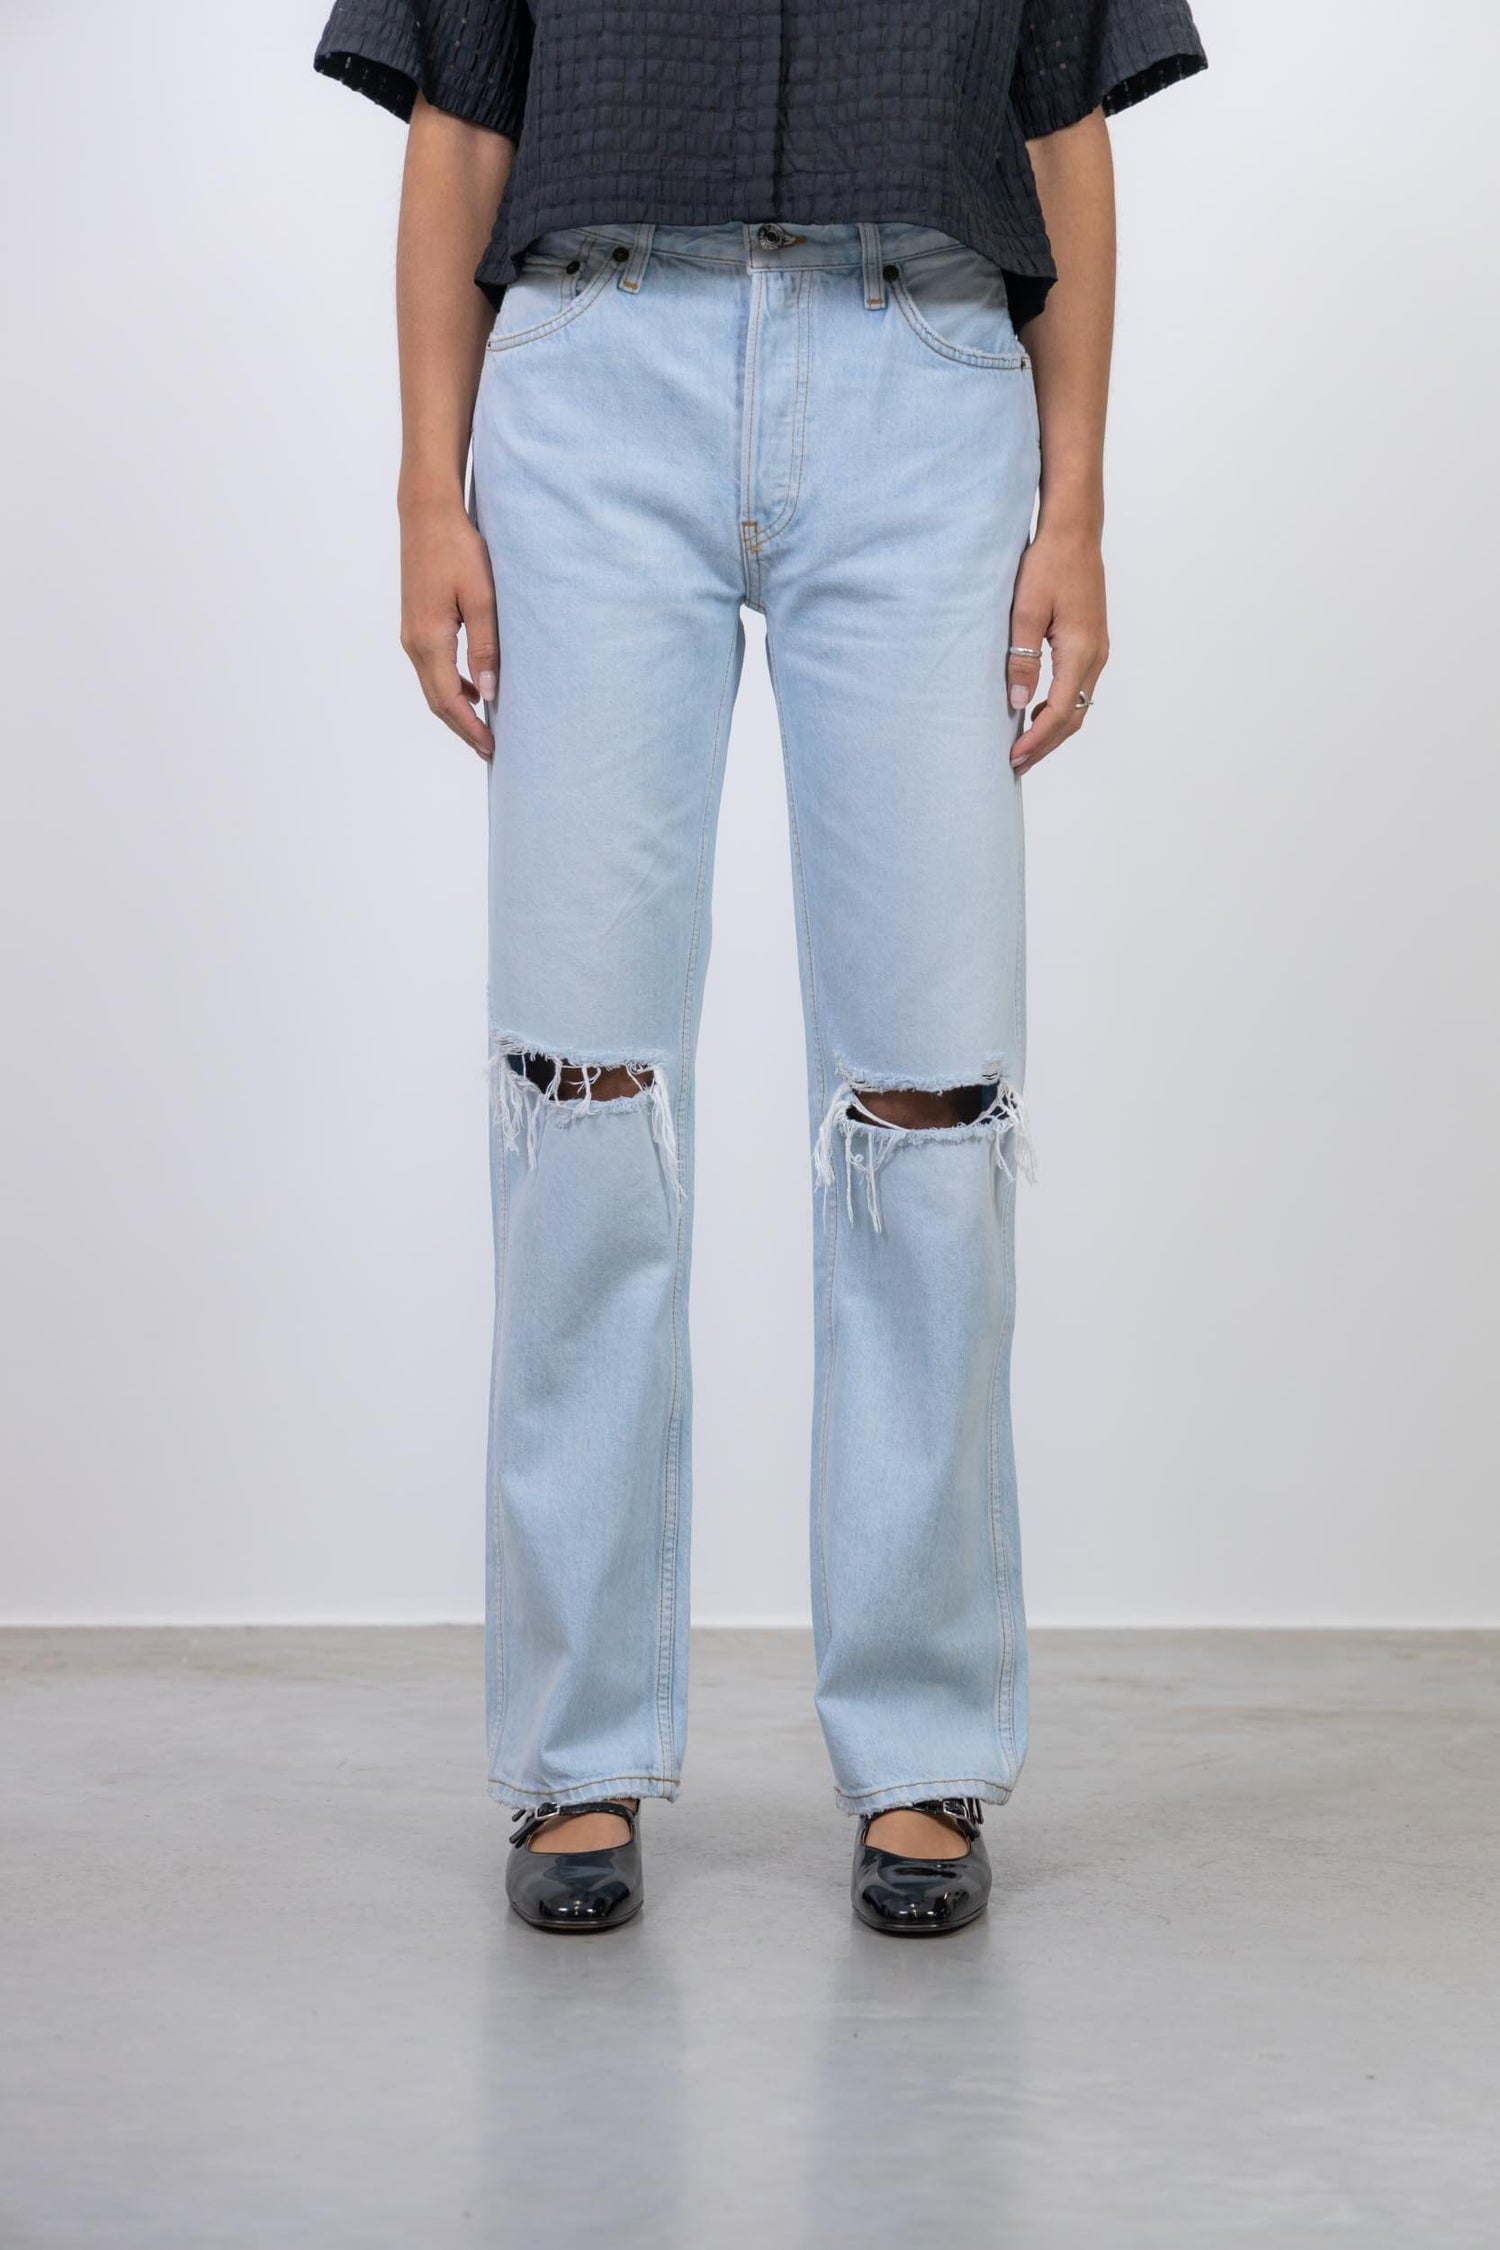 90'S HIGH RISE LOOSE JEANS IN BLEACH DESTROY JEANS RE/DONE 